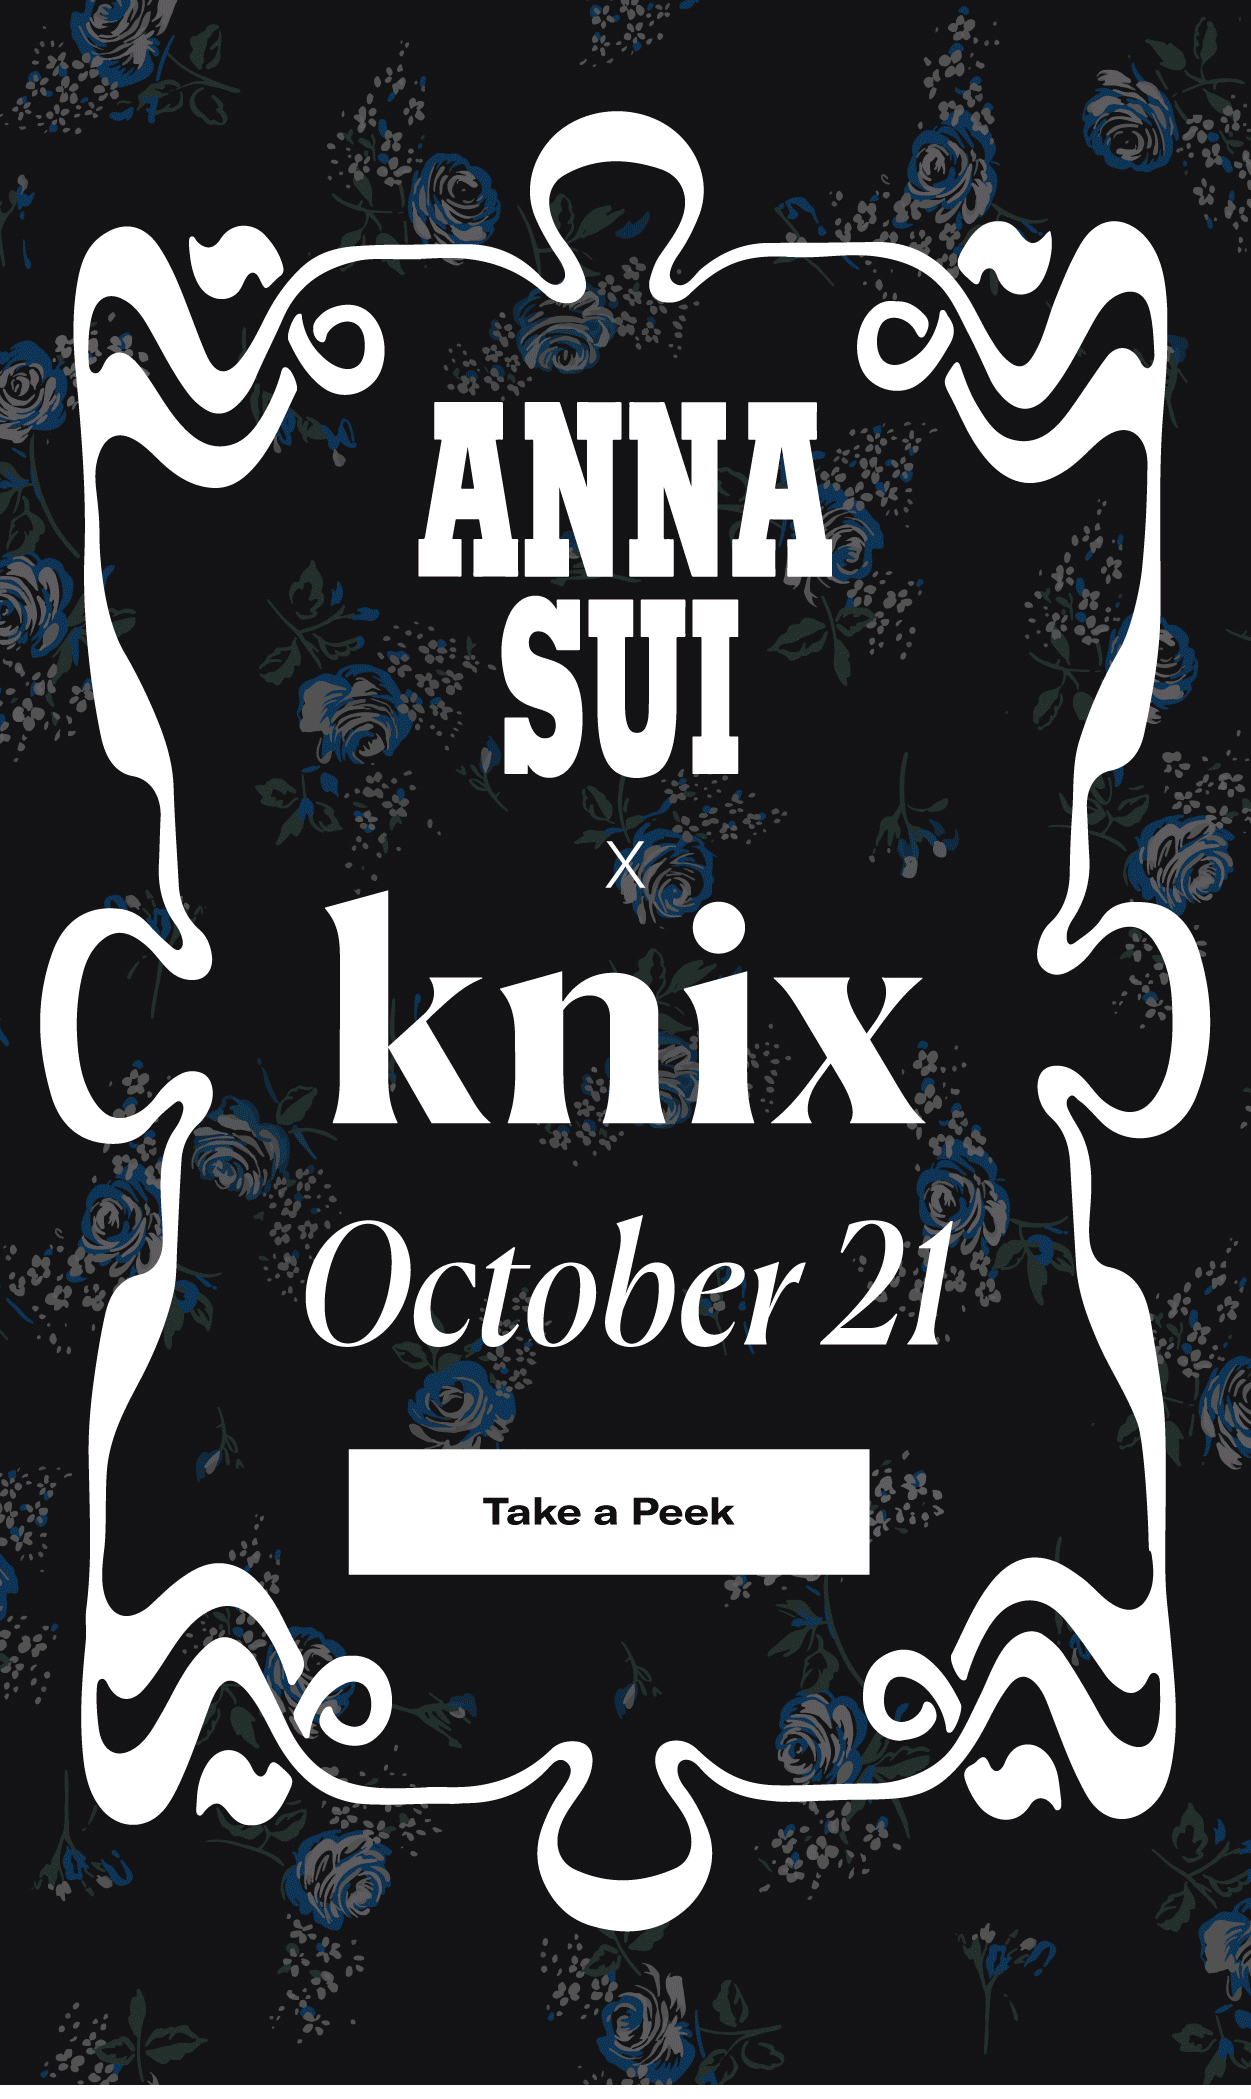 Canadian brand Knix partners with Anna Sui for stylish release